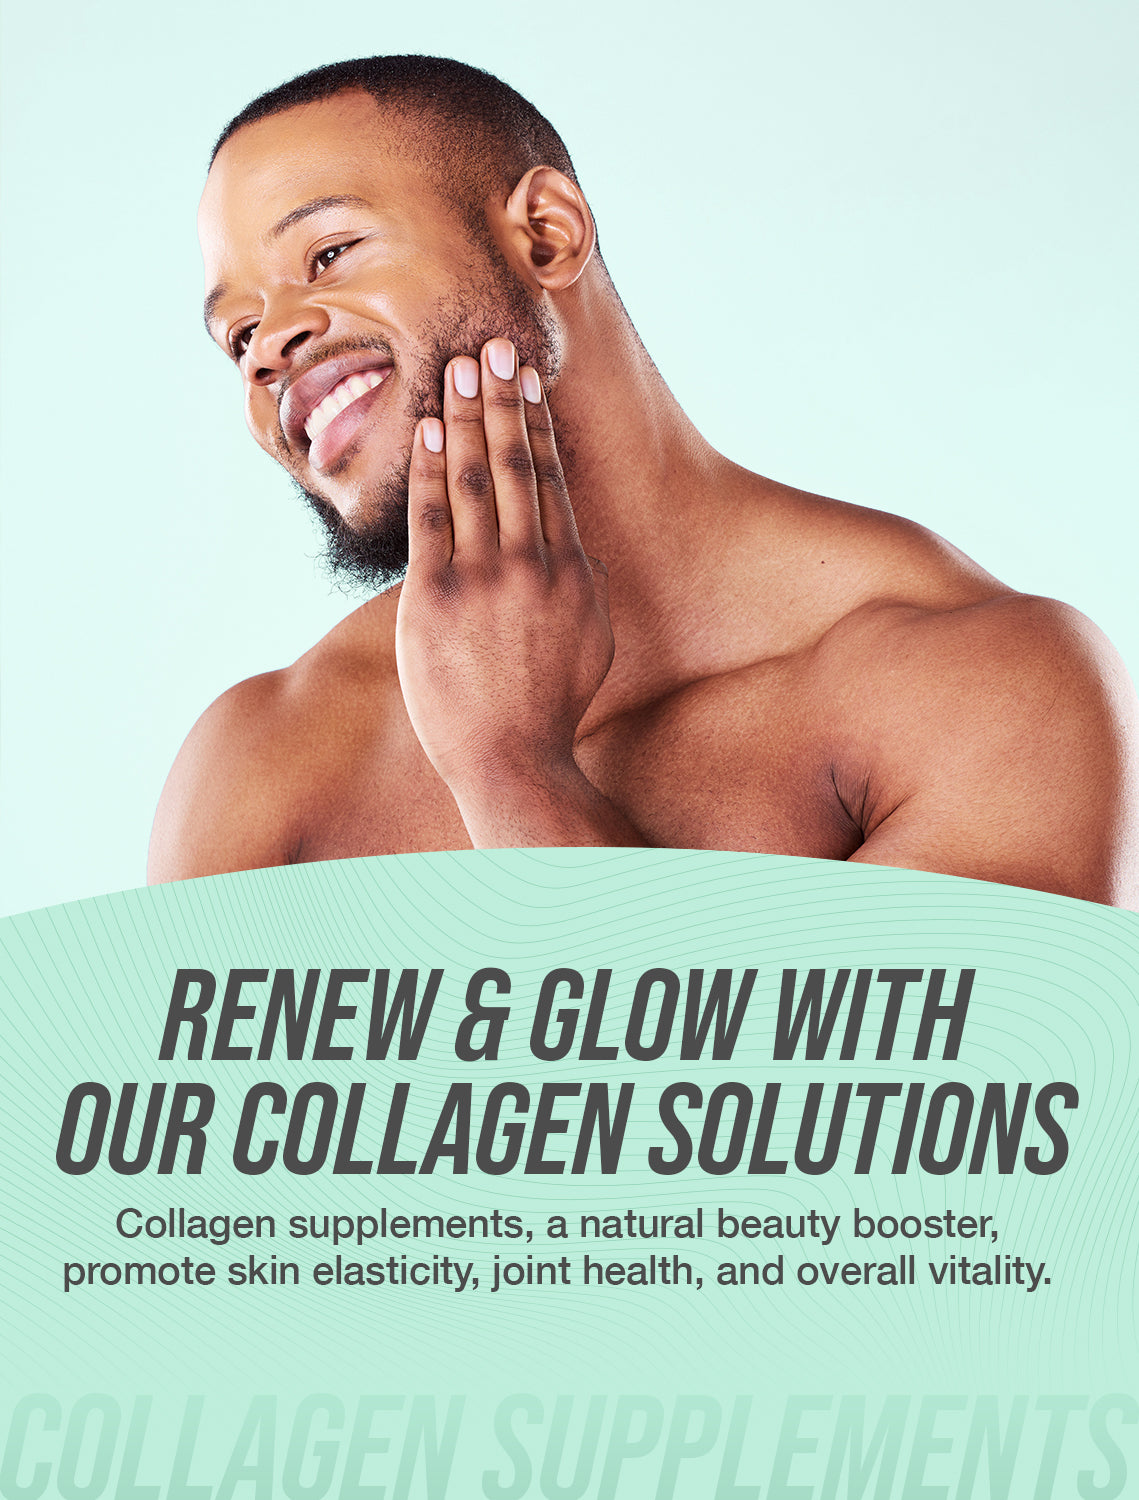 Collagen supplements category image